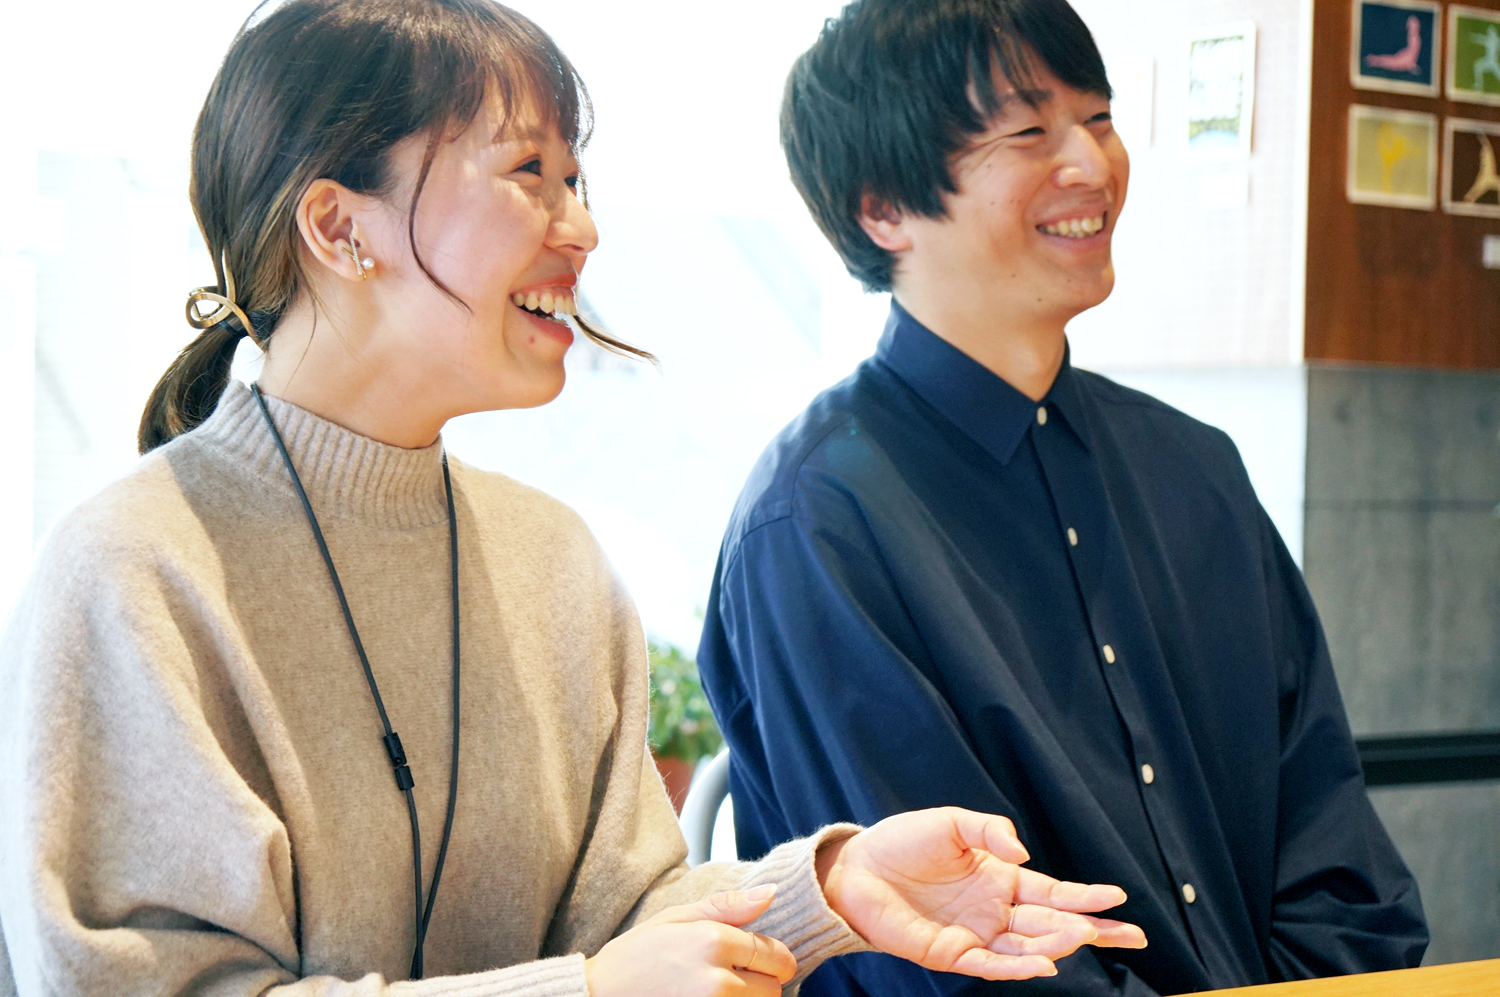 Aya Homma (left) and Akihiro Toyofuku (right) fondly look back at the hardships they experienced at the time.